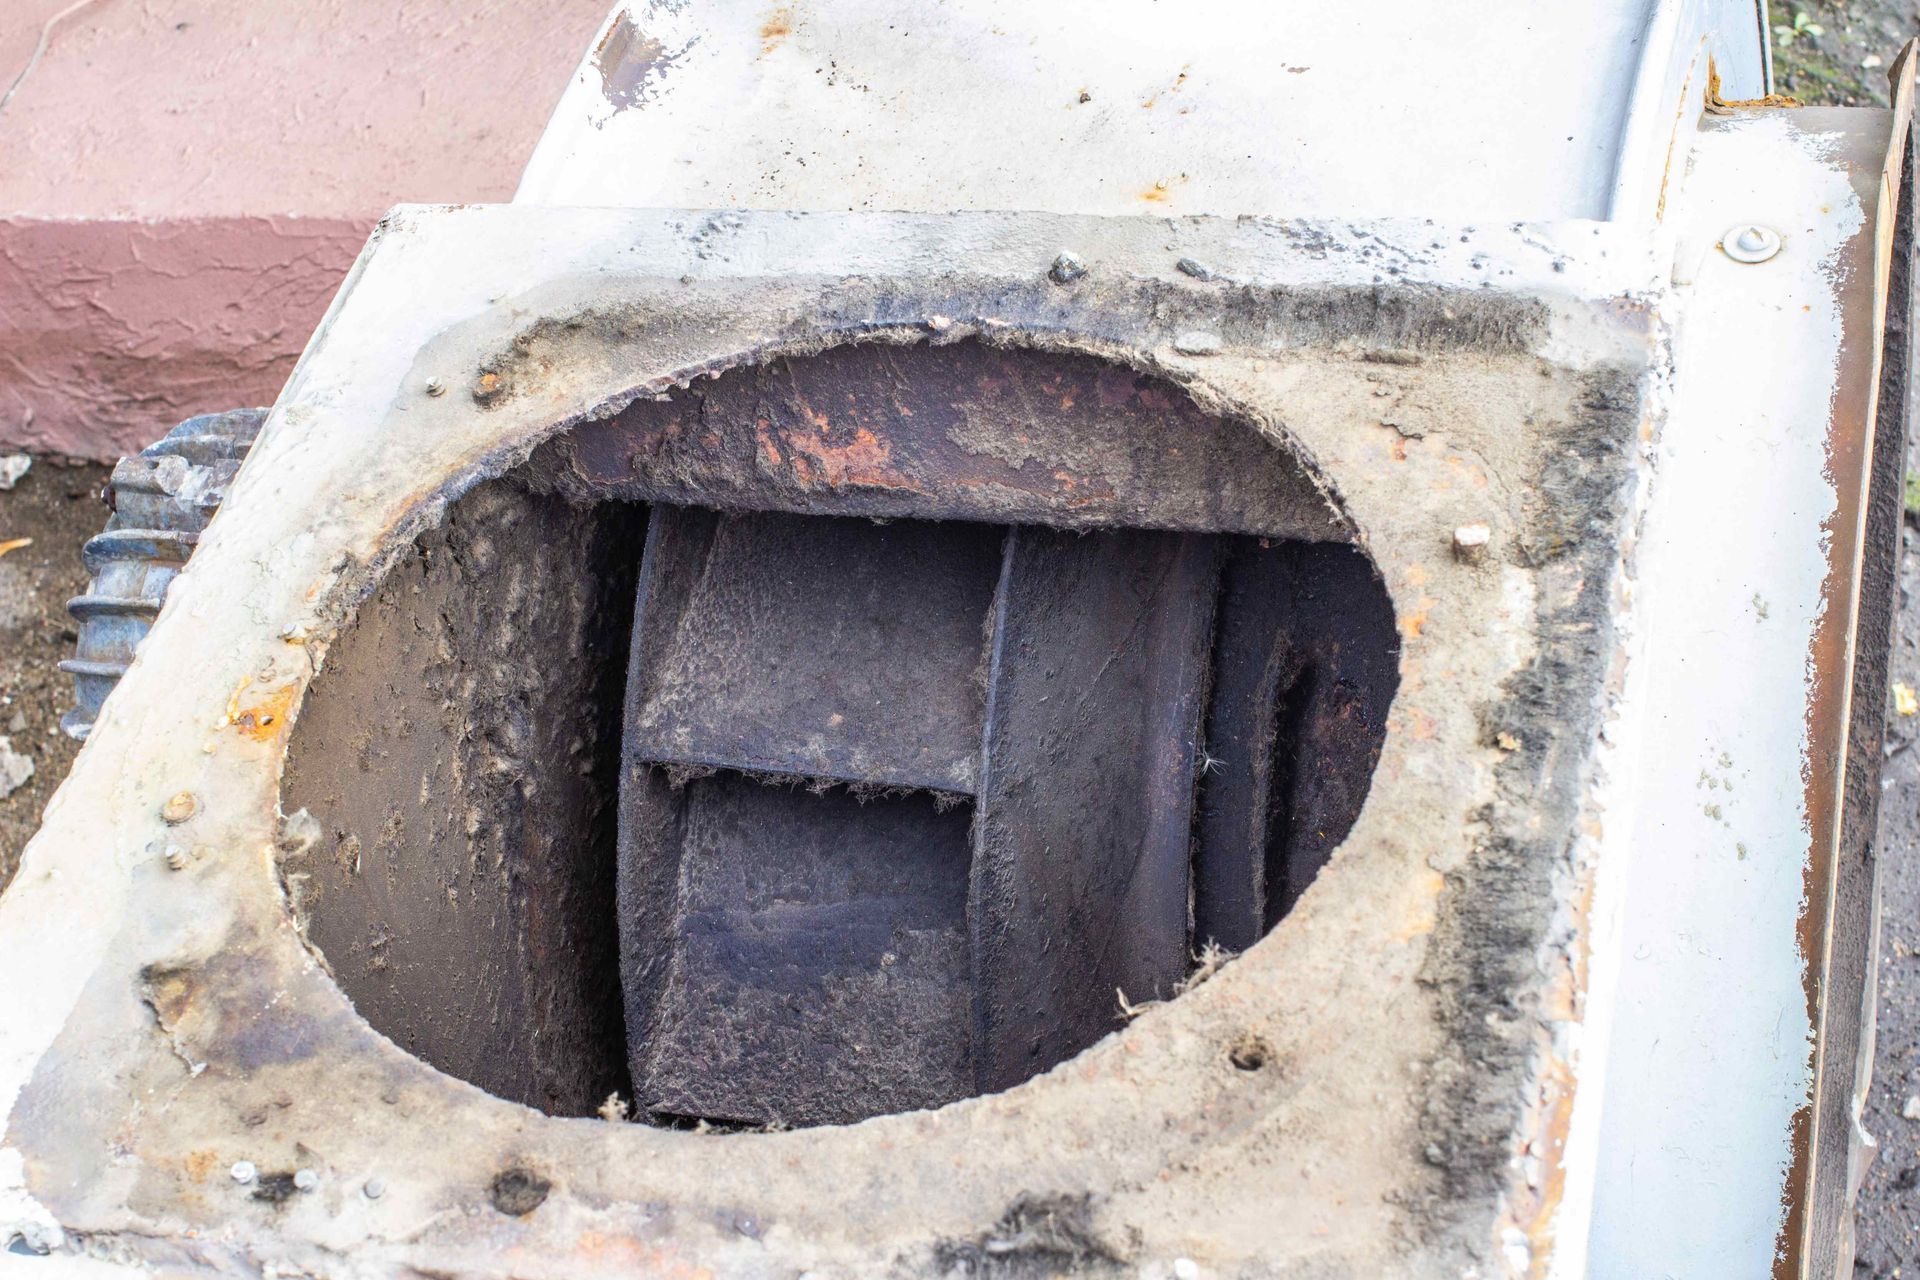 A very dusty air duct hole